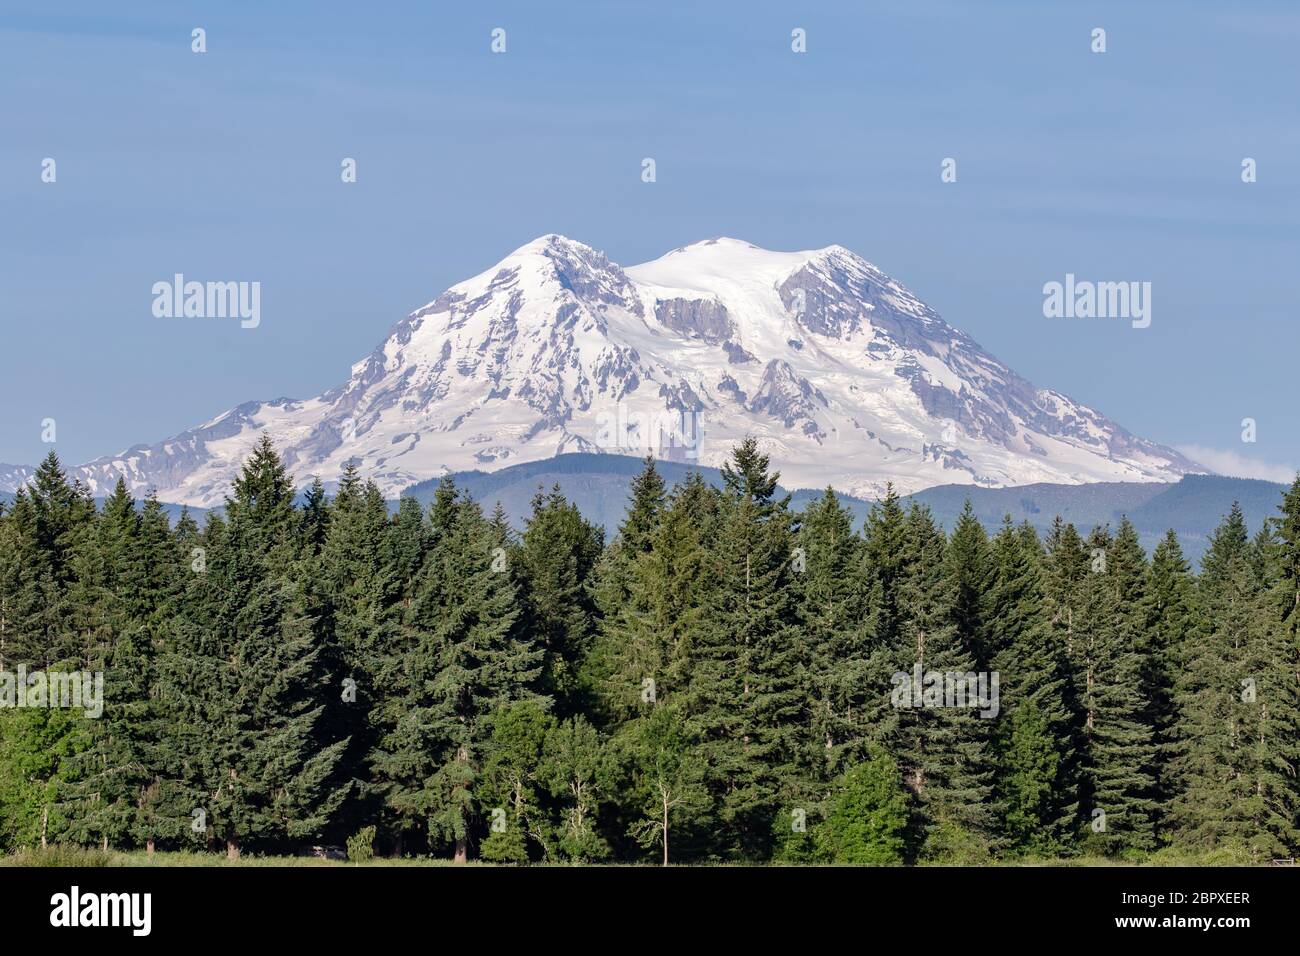 Mount Rainier is a large active stratovolcano in Washington state, in the Cascade mountain range Stock Photo